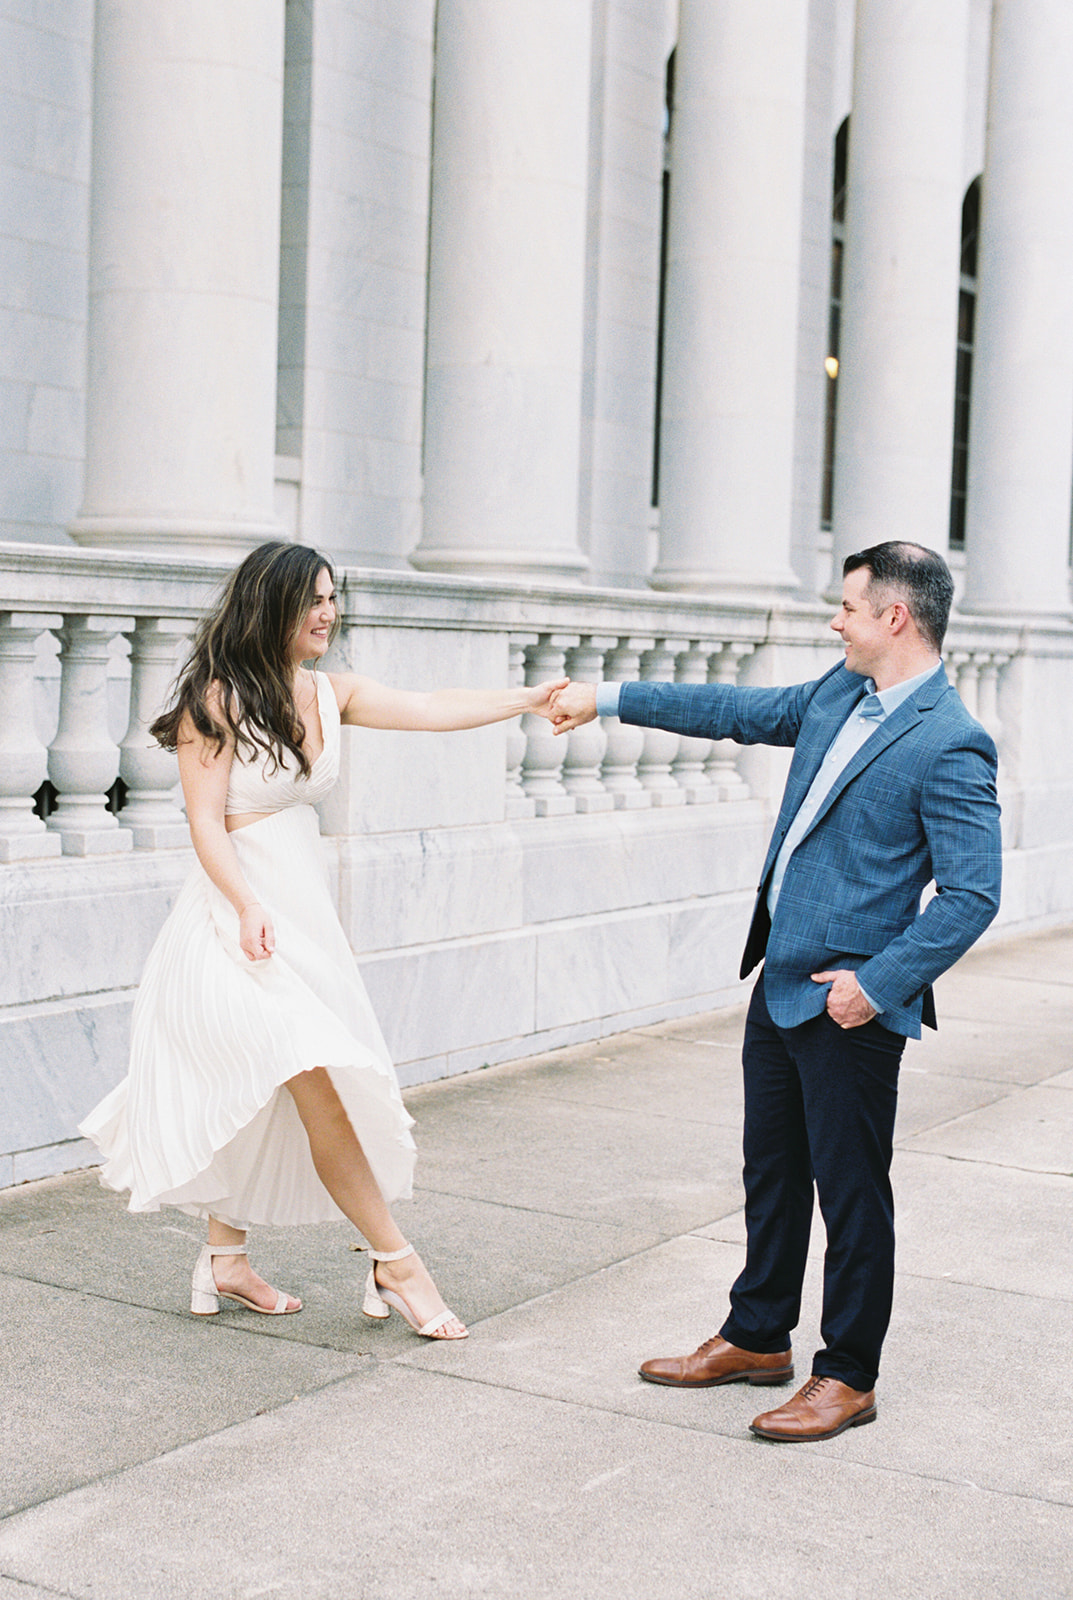 A couple dances on the sidewalk during a romantic engagement session in front of the Robert S. Vance Federal Building